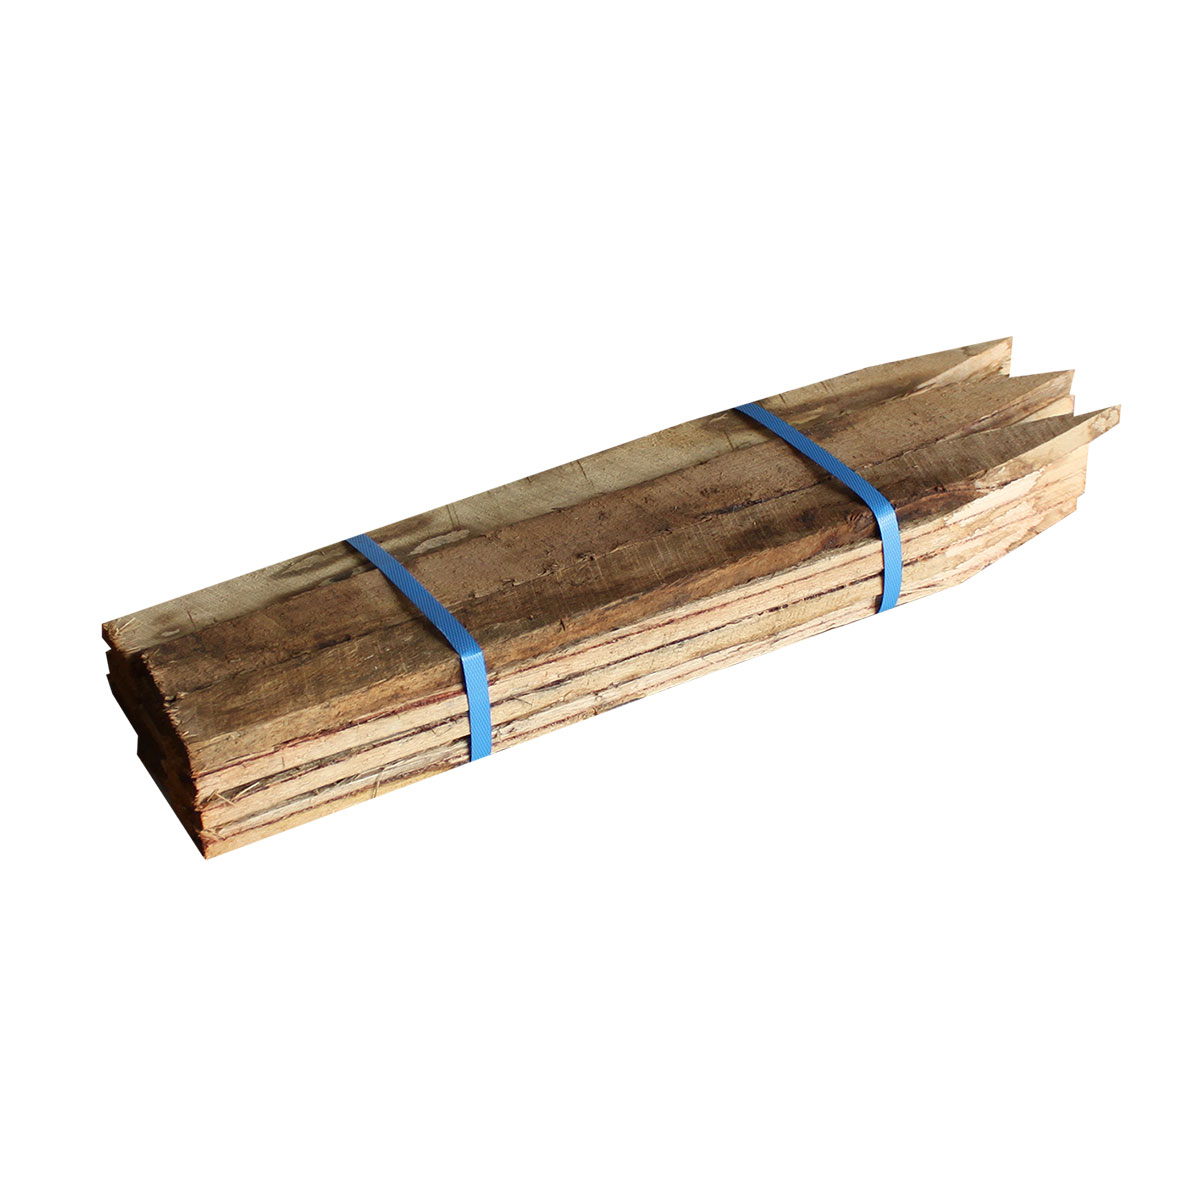 Hardwood Stakes 50 x 13 x 750mm - 12 Pack